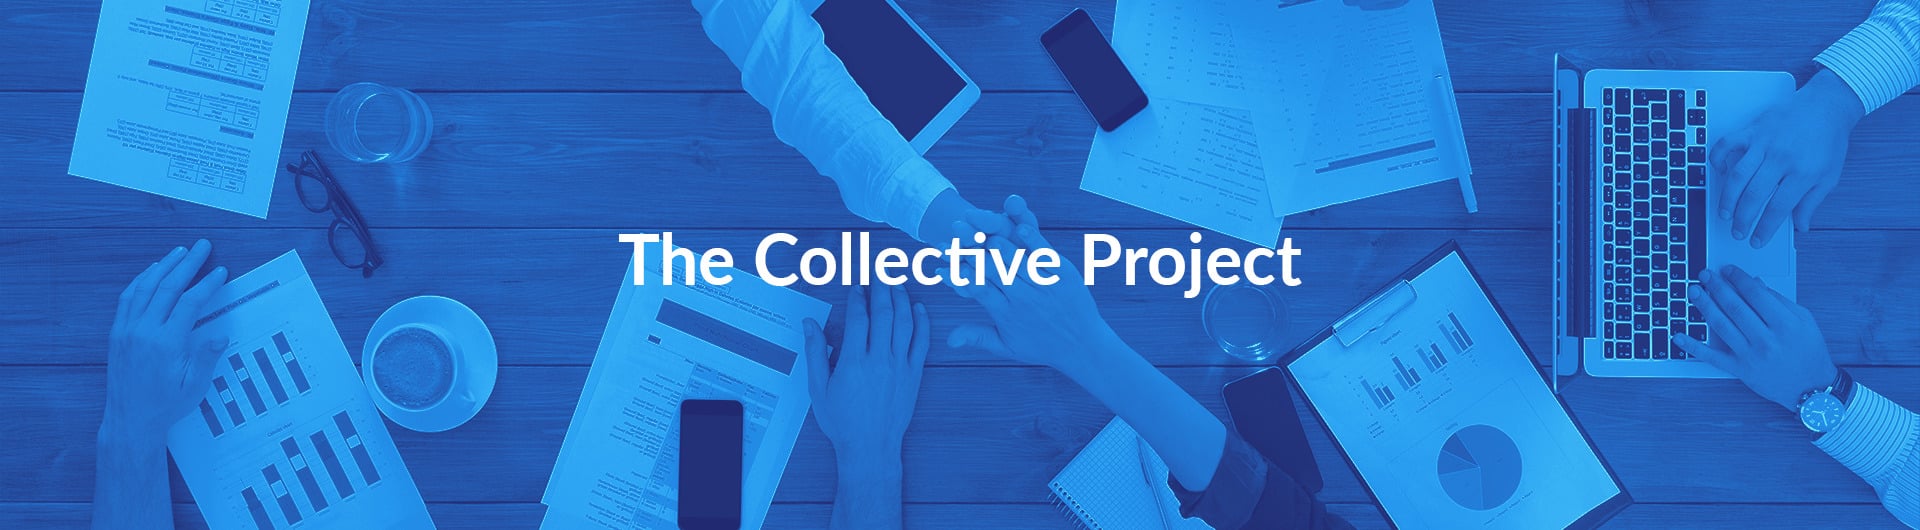 thecollectiveproject.